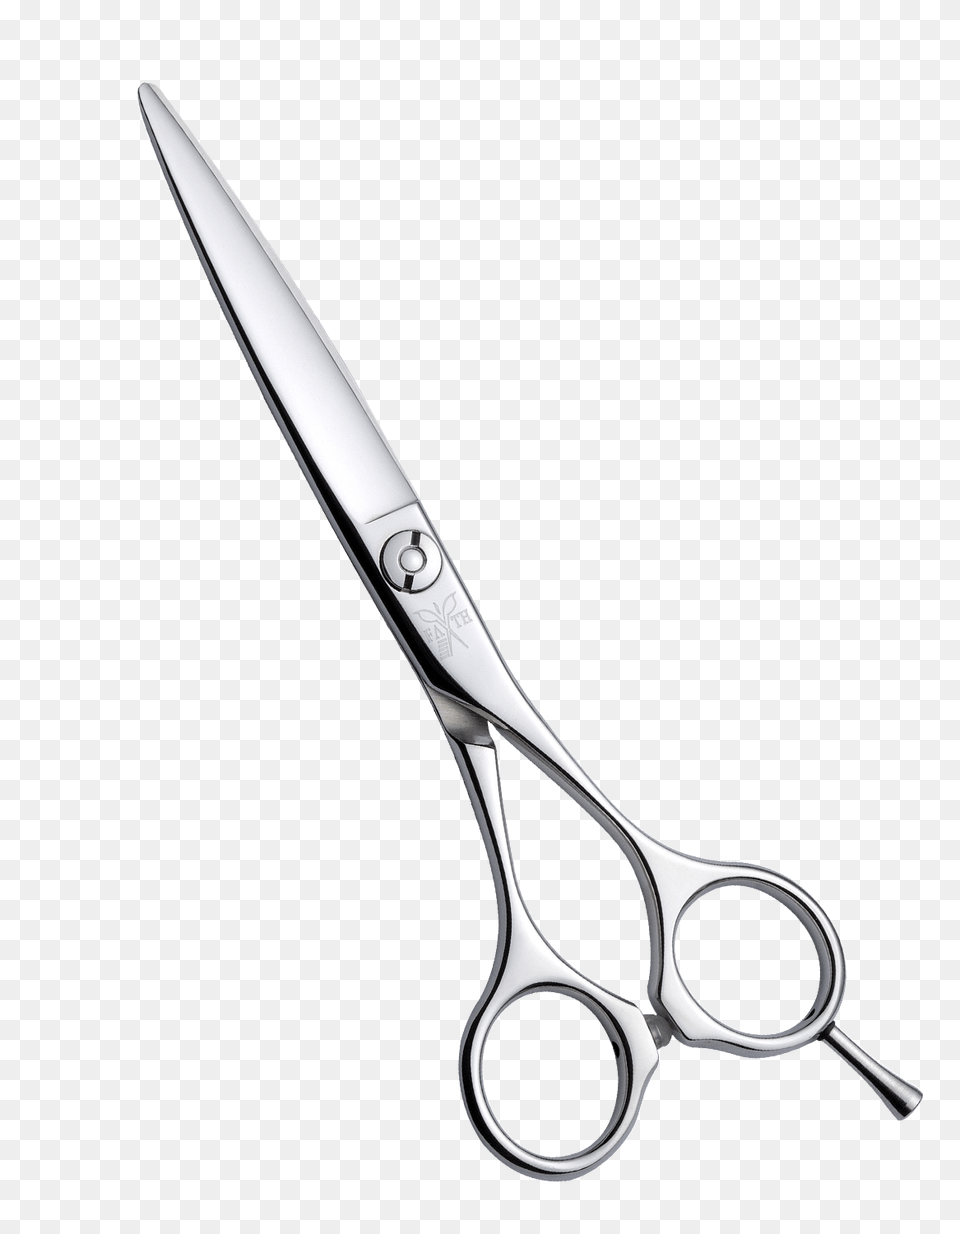 Images Of Barber Scissors Clip Art, Blade, Shears, Weapon Png